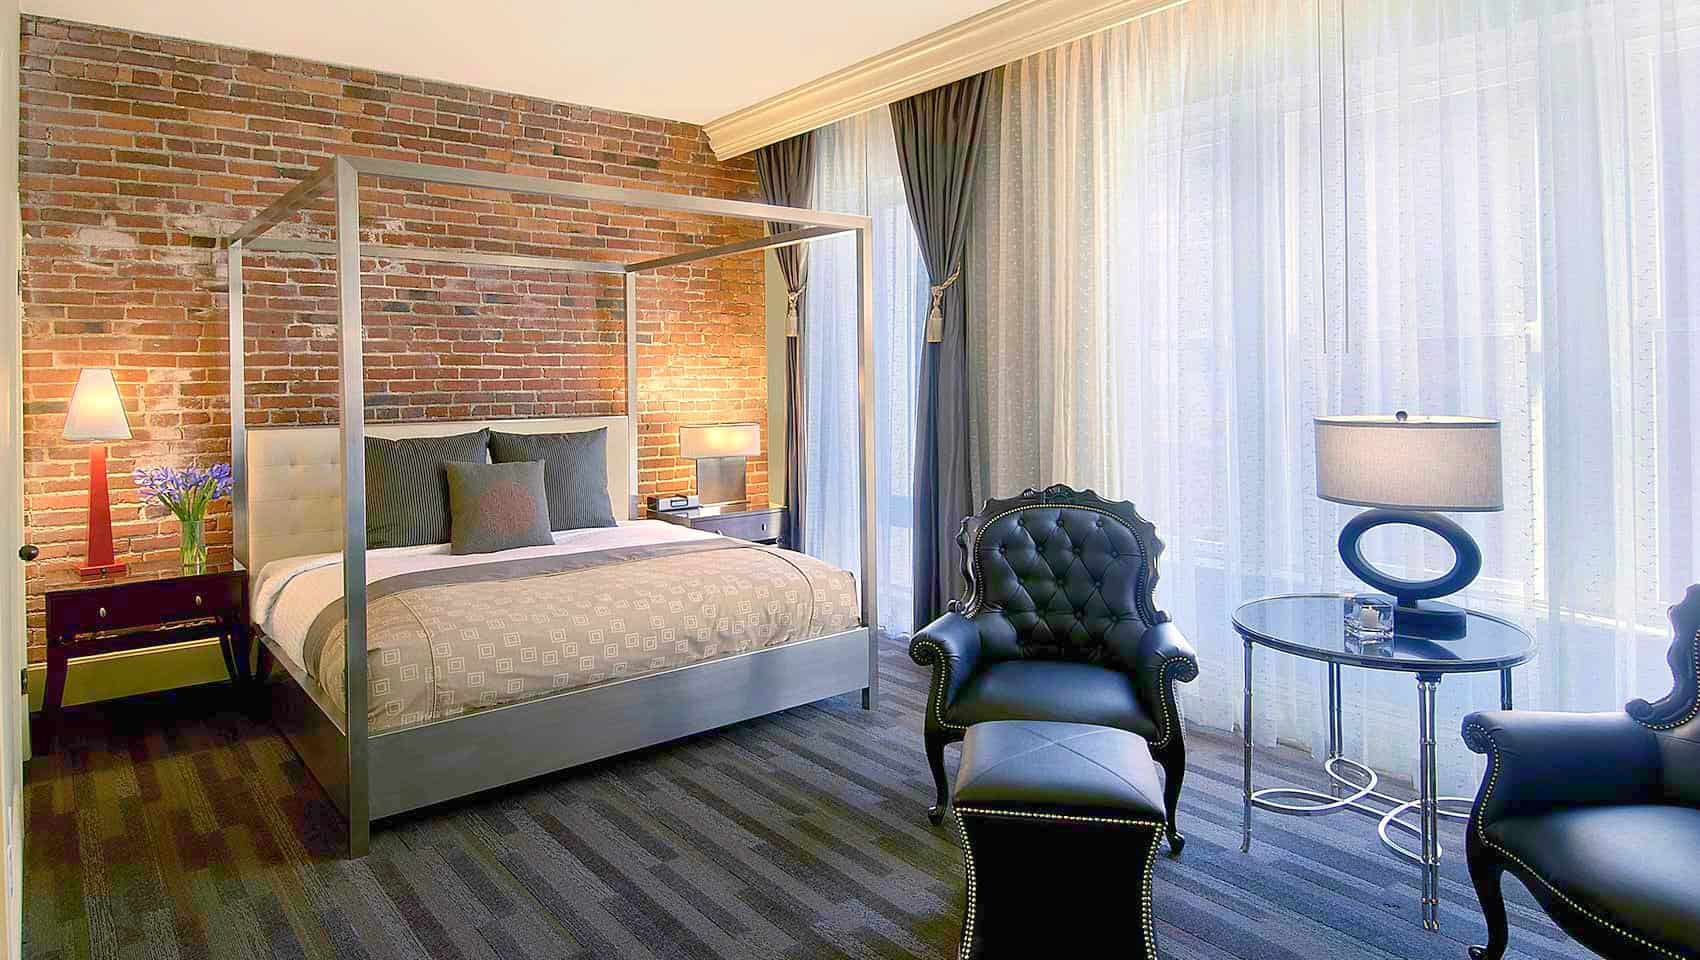 Kimpton Alexis Hotel - a chic vintage style boutique in Seattle